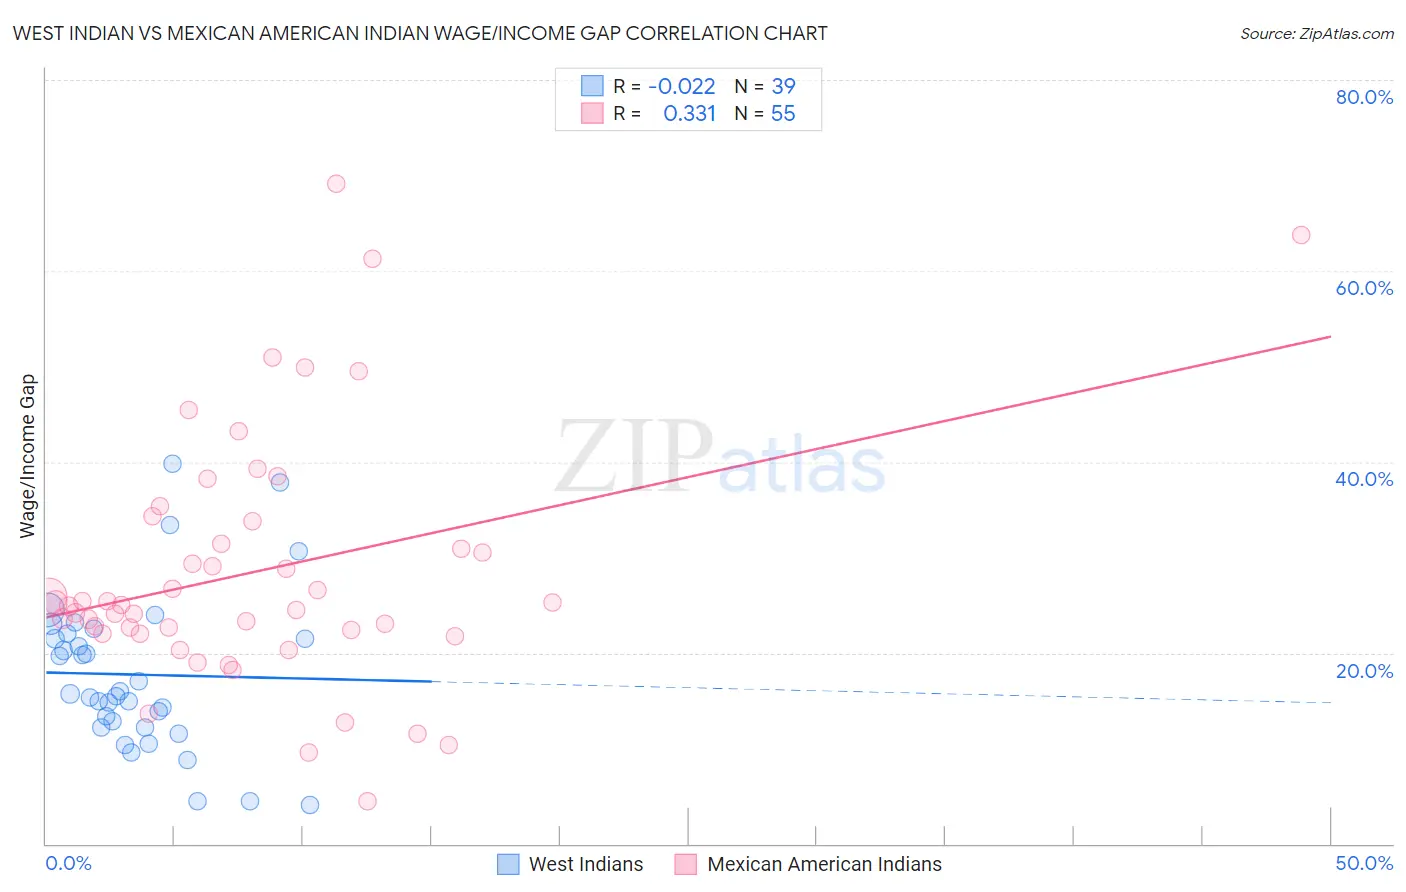 West Indian vs Mexican American Indian Wage/Income Gap